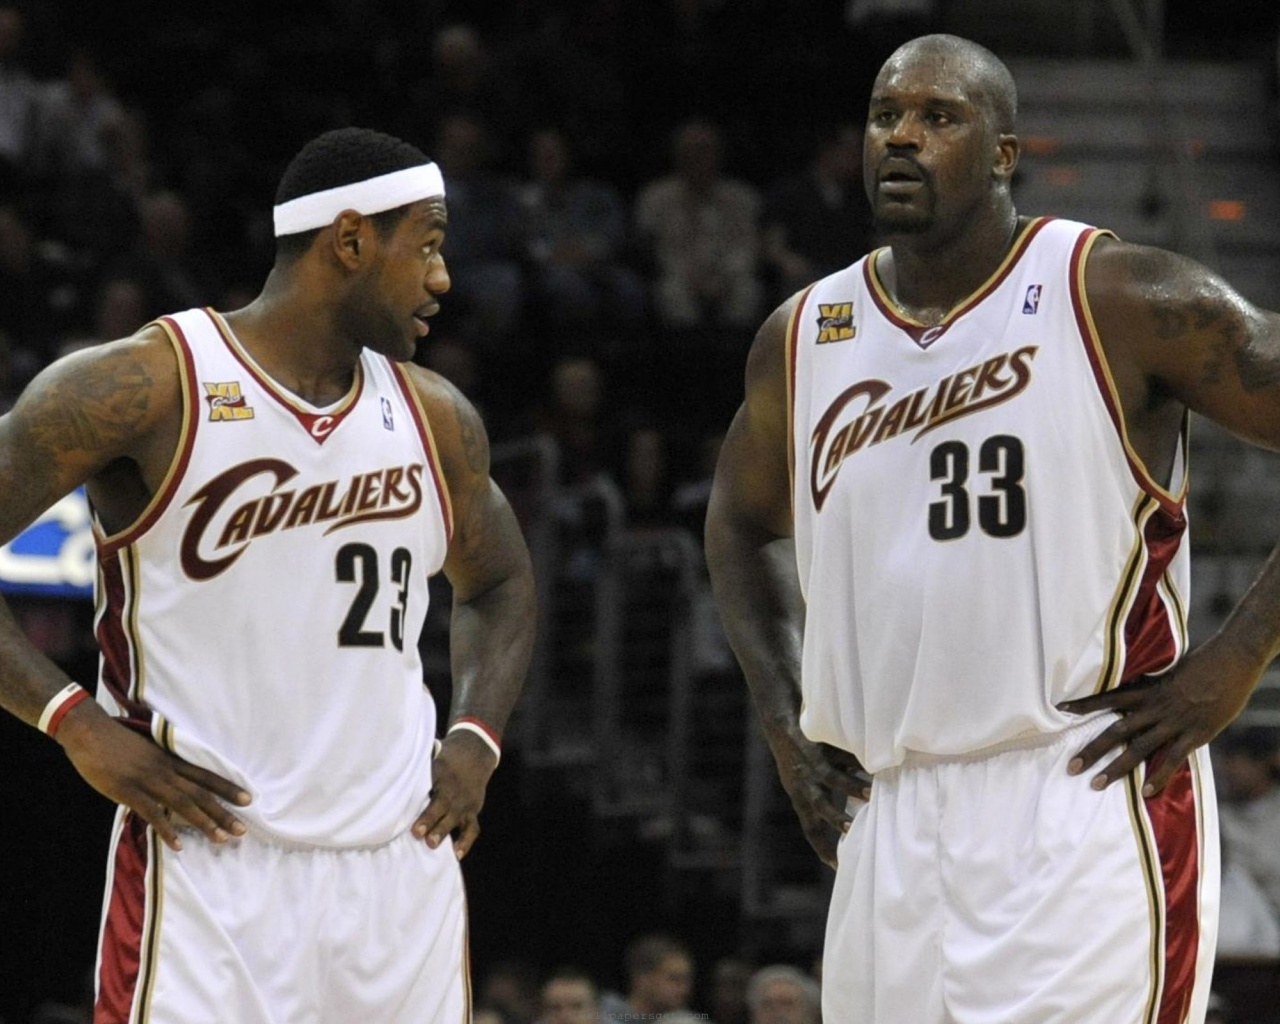 Cleveland Cavaliers Nba American Basketball Lebron James Shaquille O Neal